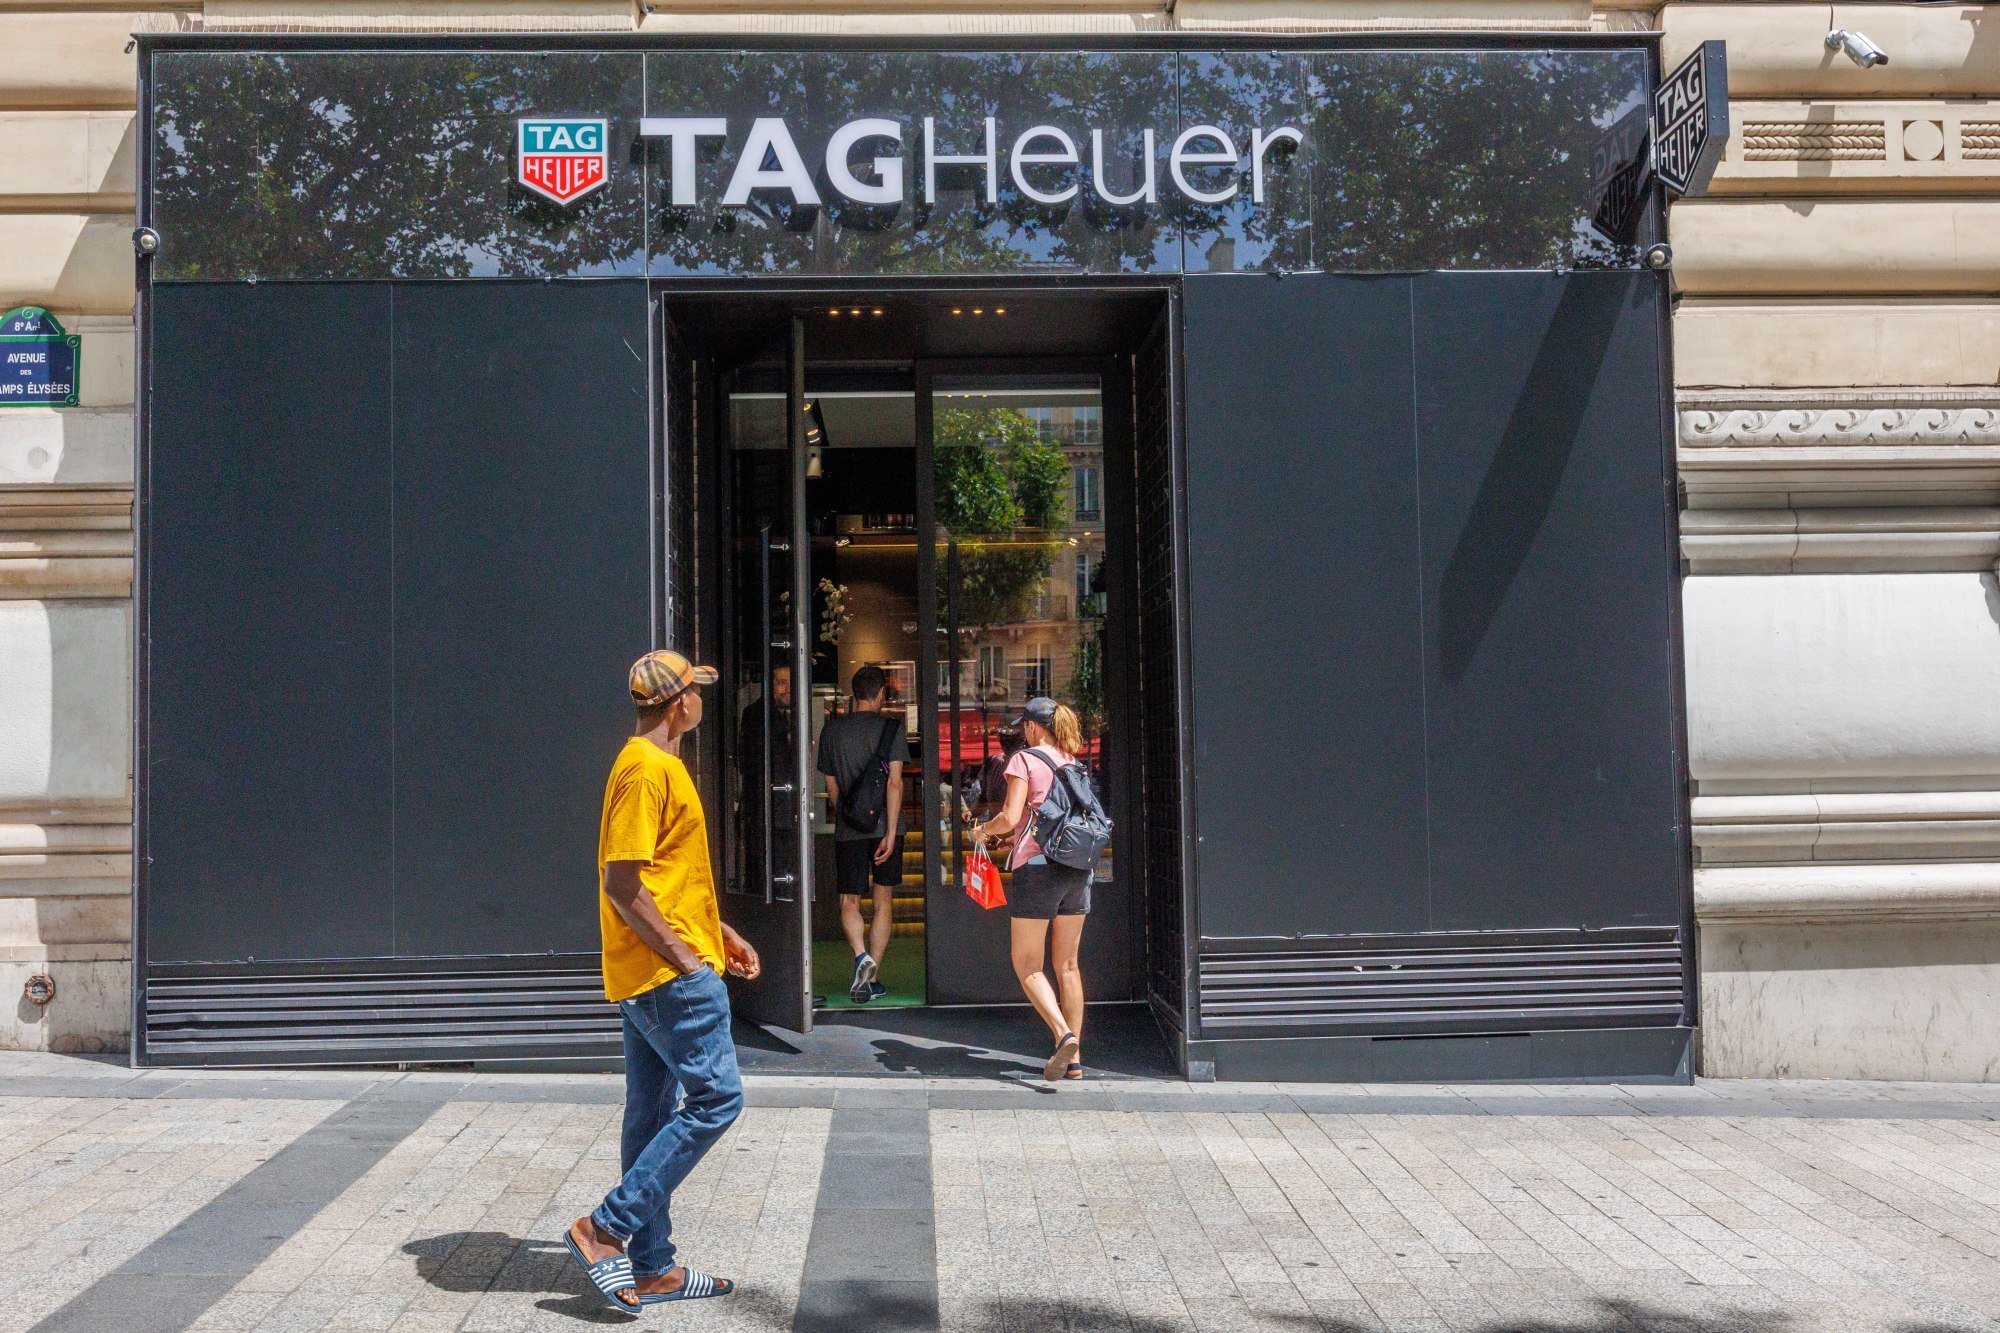 Tag Heuer's Frederic Arnault calls for agility in business